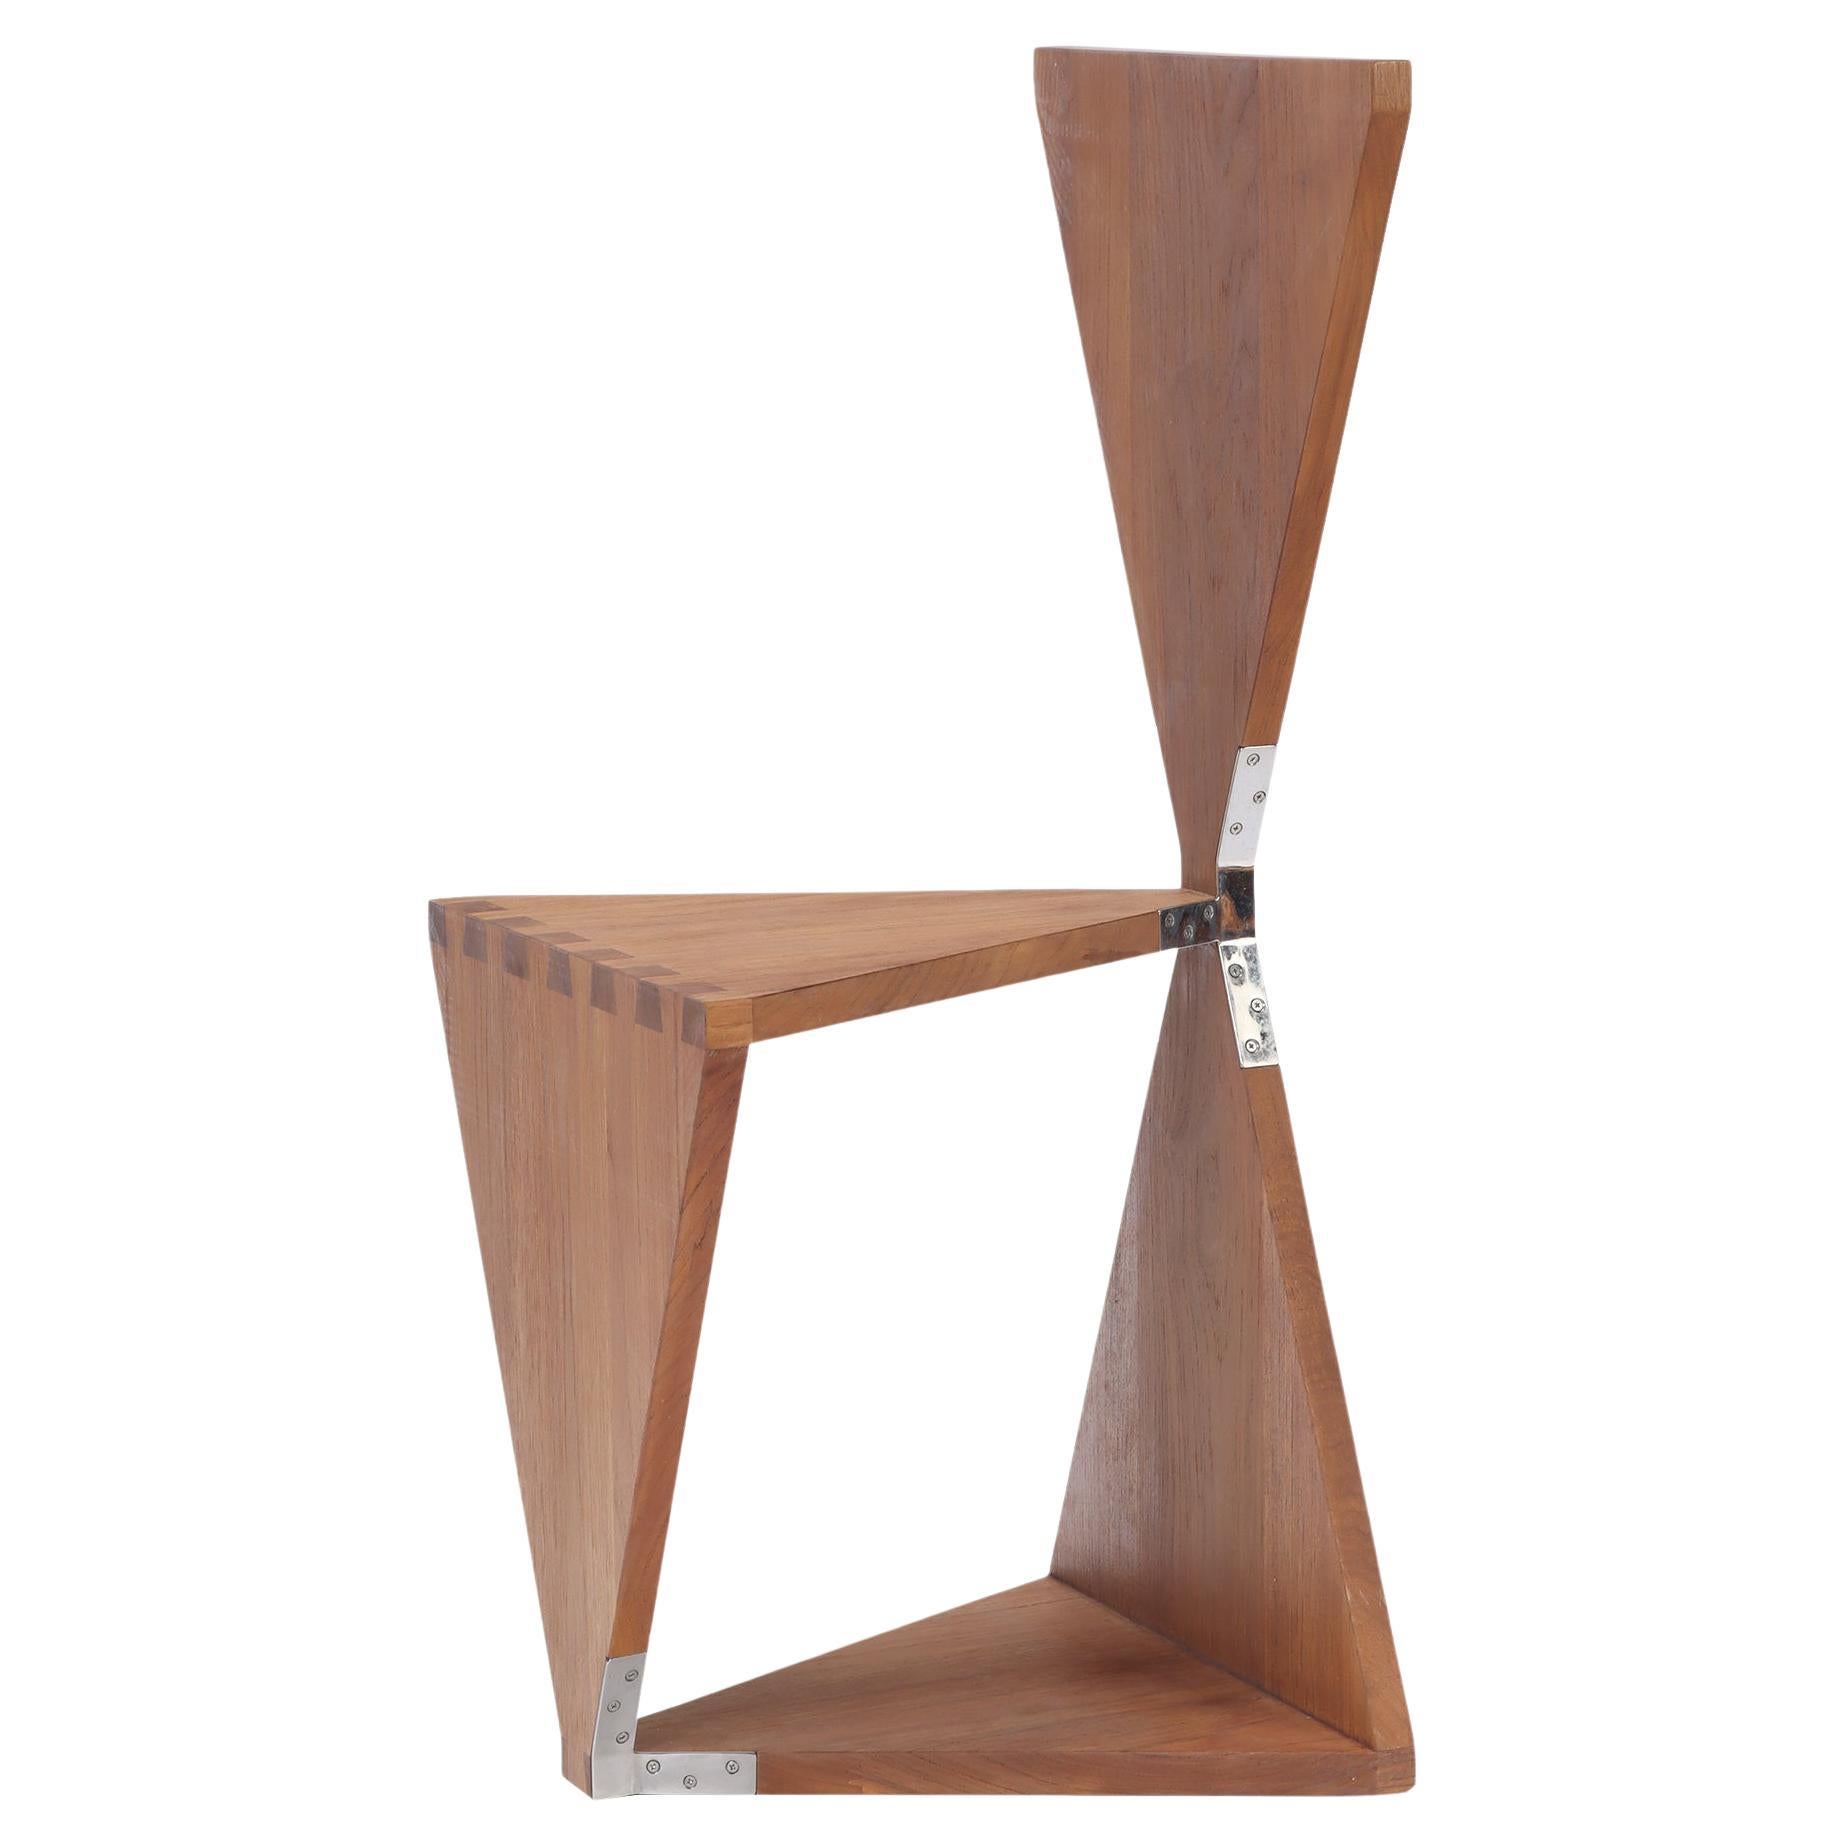 "Elfenbein" Oiled Solid Teak Hall Chair Designed by Maximilian Eicke for Max ID For Sale